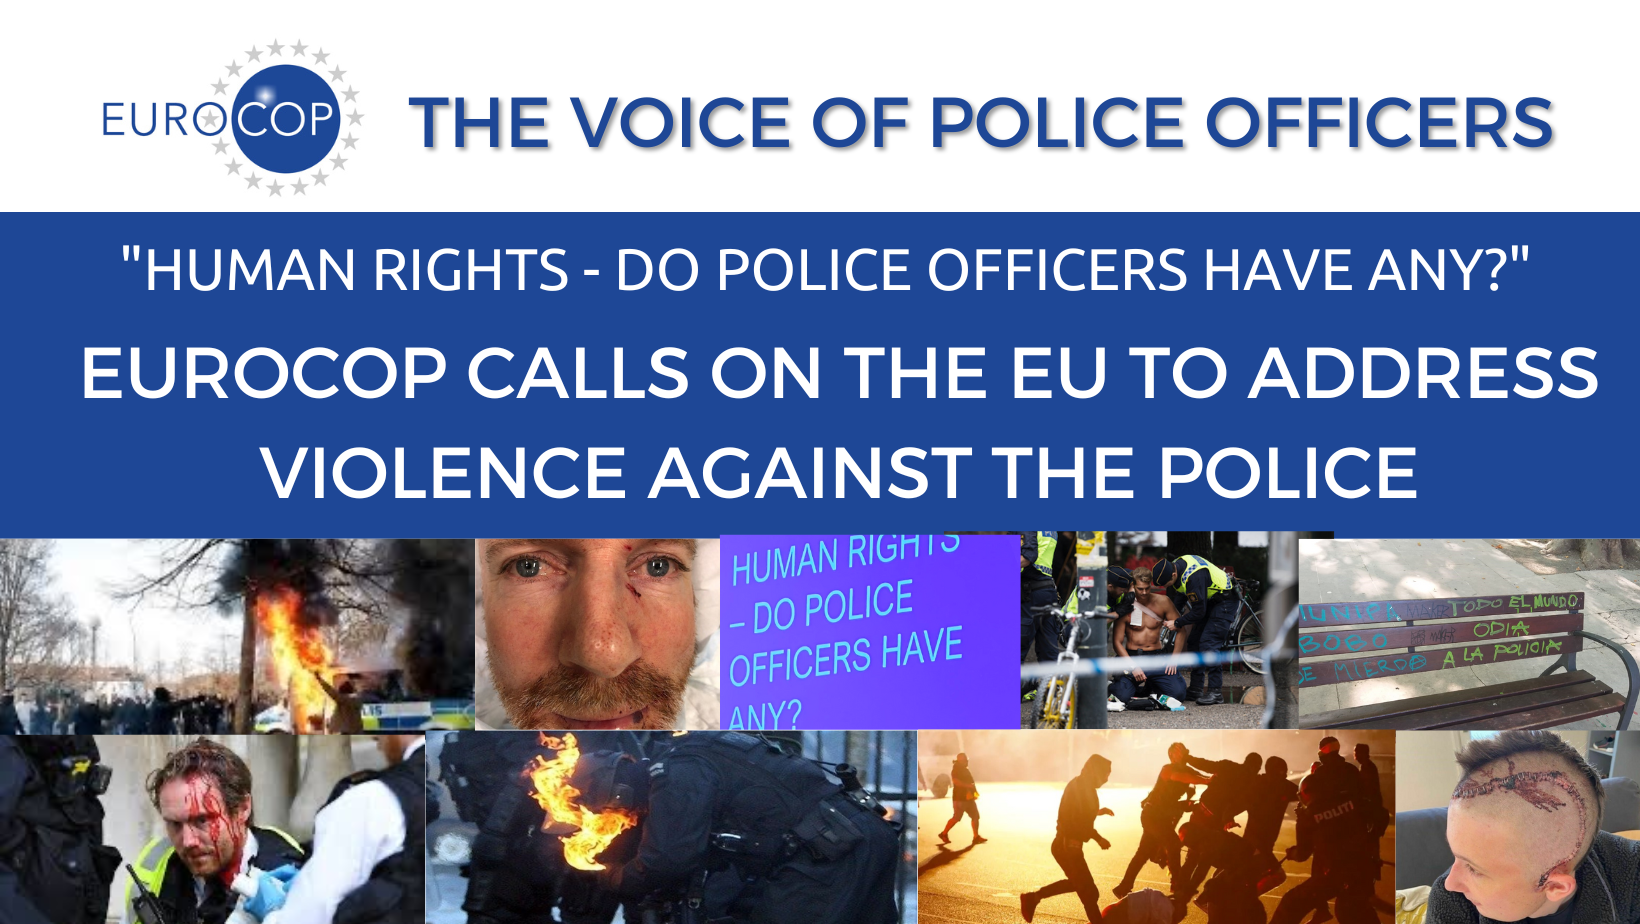 EuroCOP calls on the EU to address Violence against the Police. Human Rights – Do Police Officers Have Any?